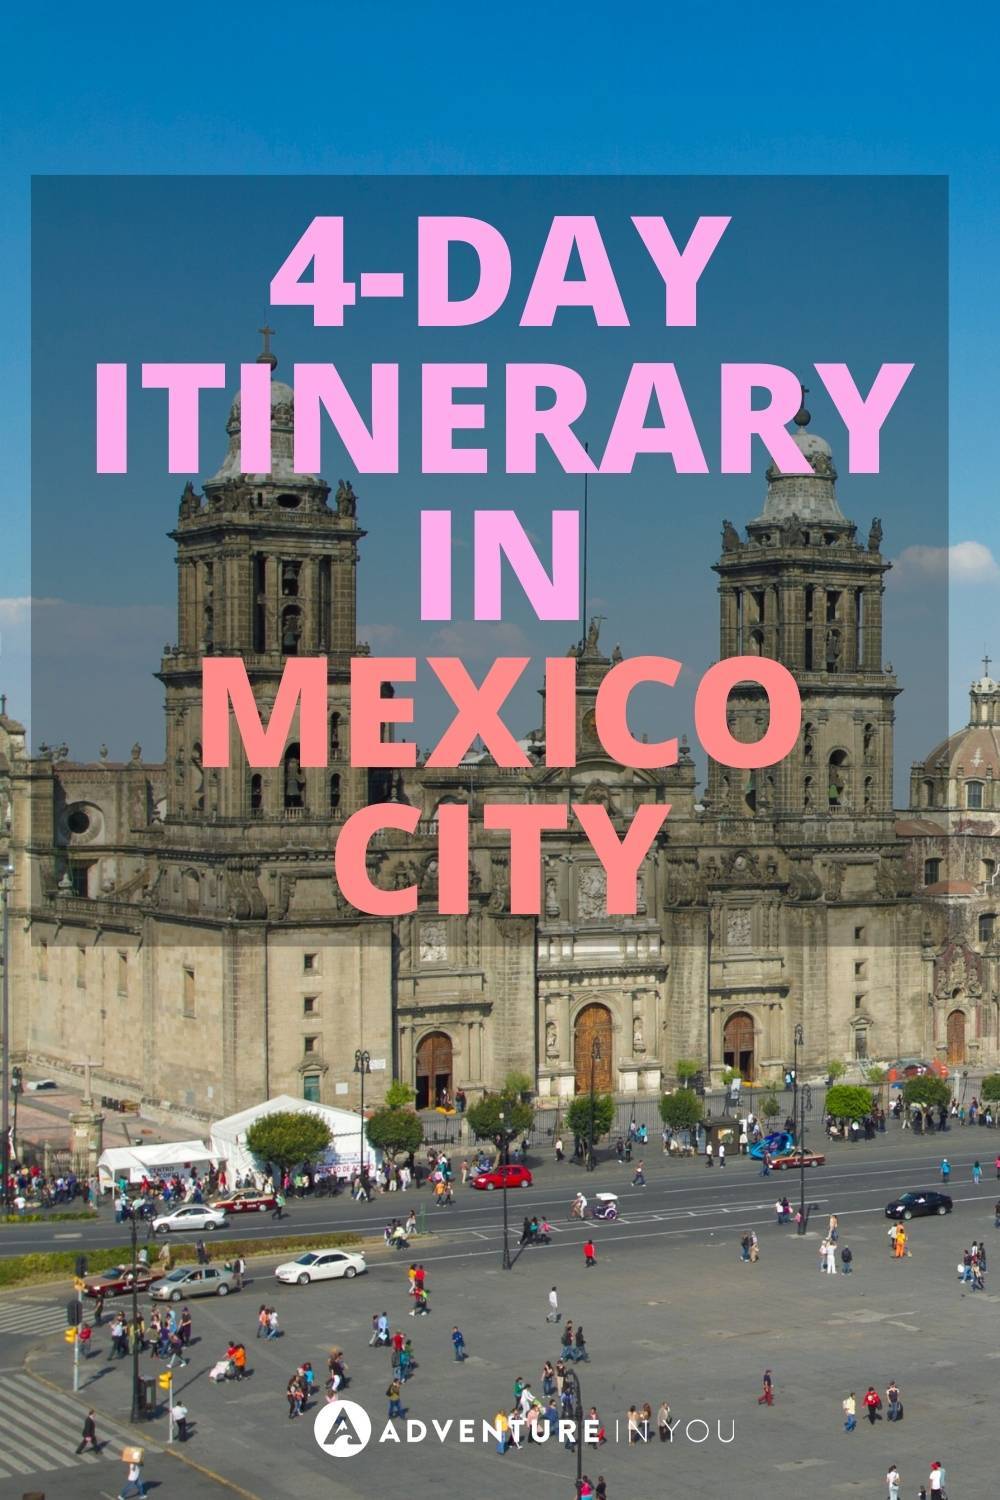 4-Day Itinerary in Mexico City | Heading Mexico City and looking for the best recommendations? Then you’re in the right place! In this article, I will share the best 4-day itinerary in Mexico City to make sure you have the BEST time in this beautiful, vibrant city. #mexico #mexicocity #mexiicoitinerary